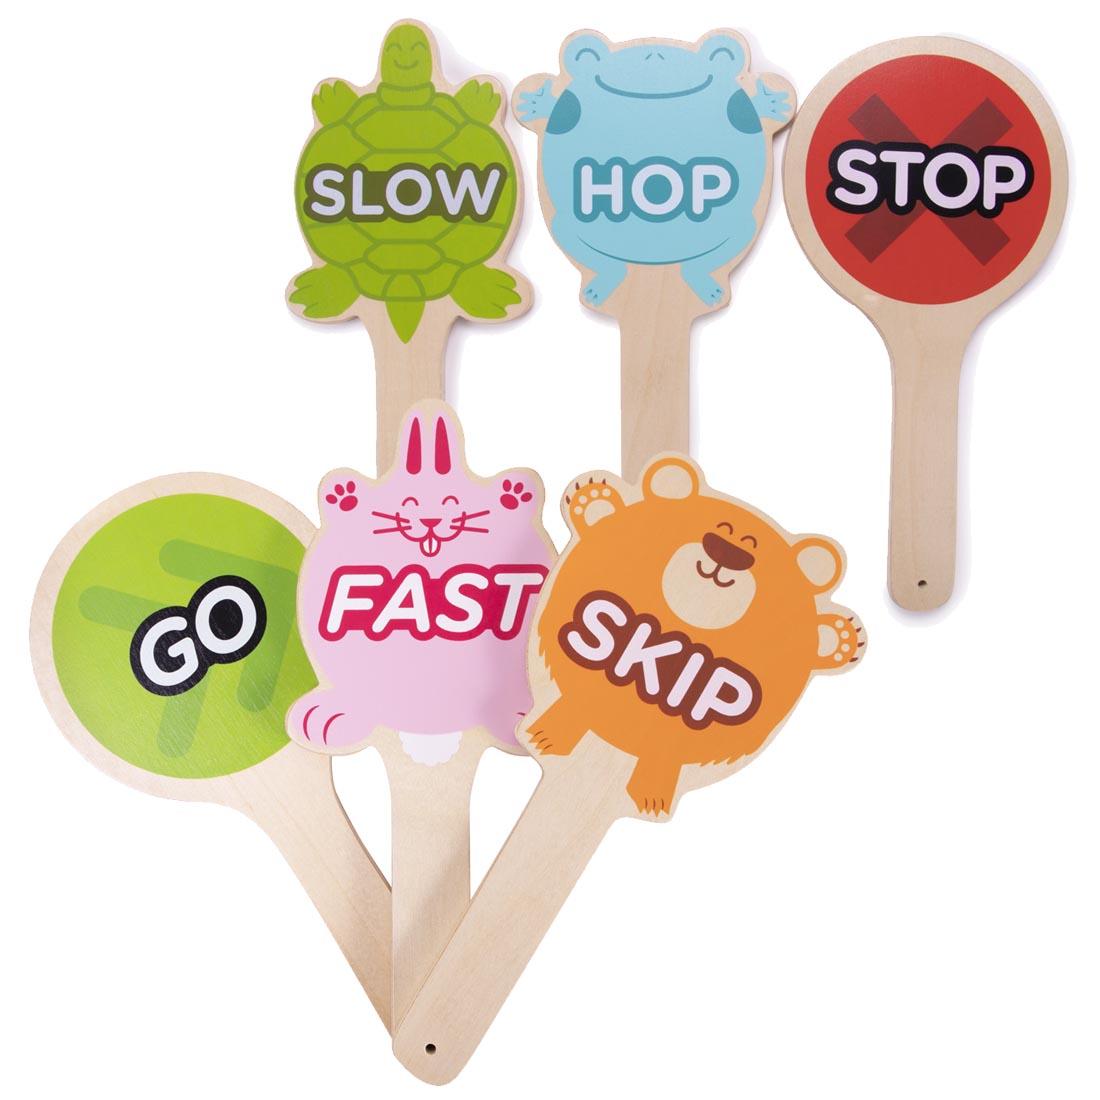 Wooden hand paddles with words printed: slow, hop, stop, go, fast and skip